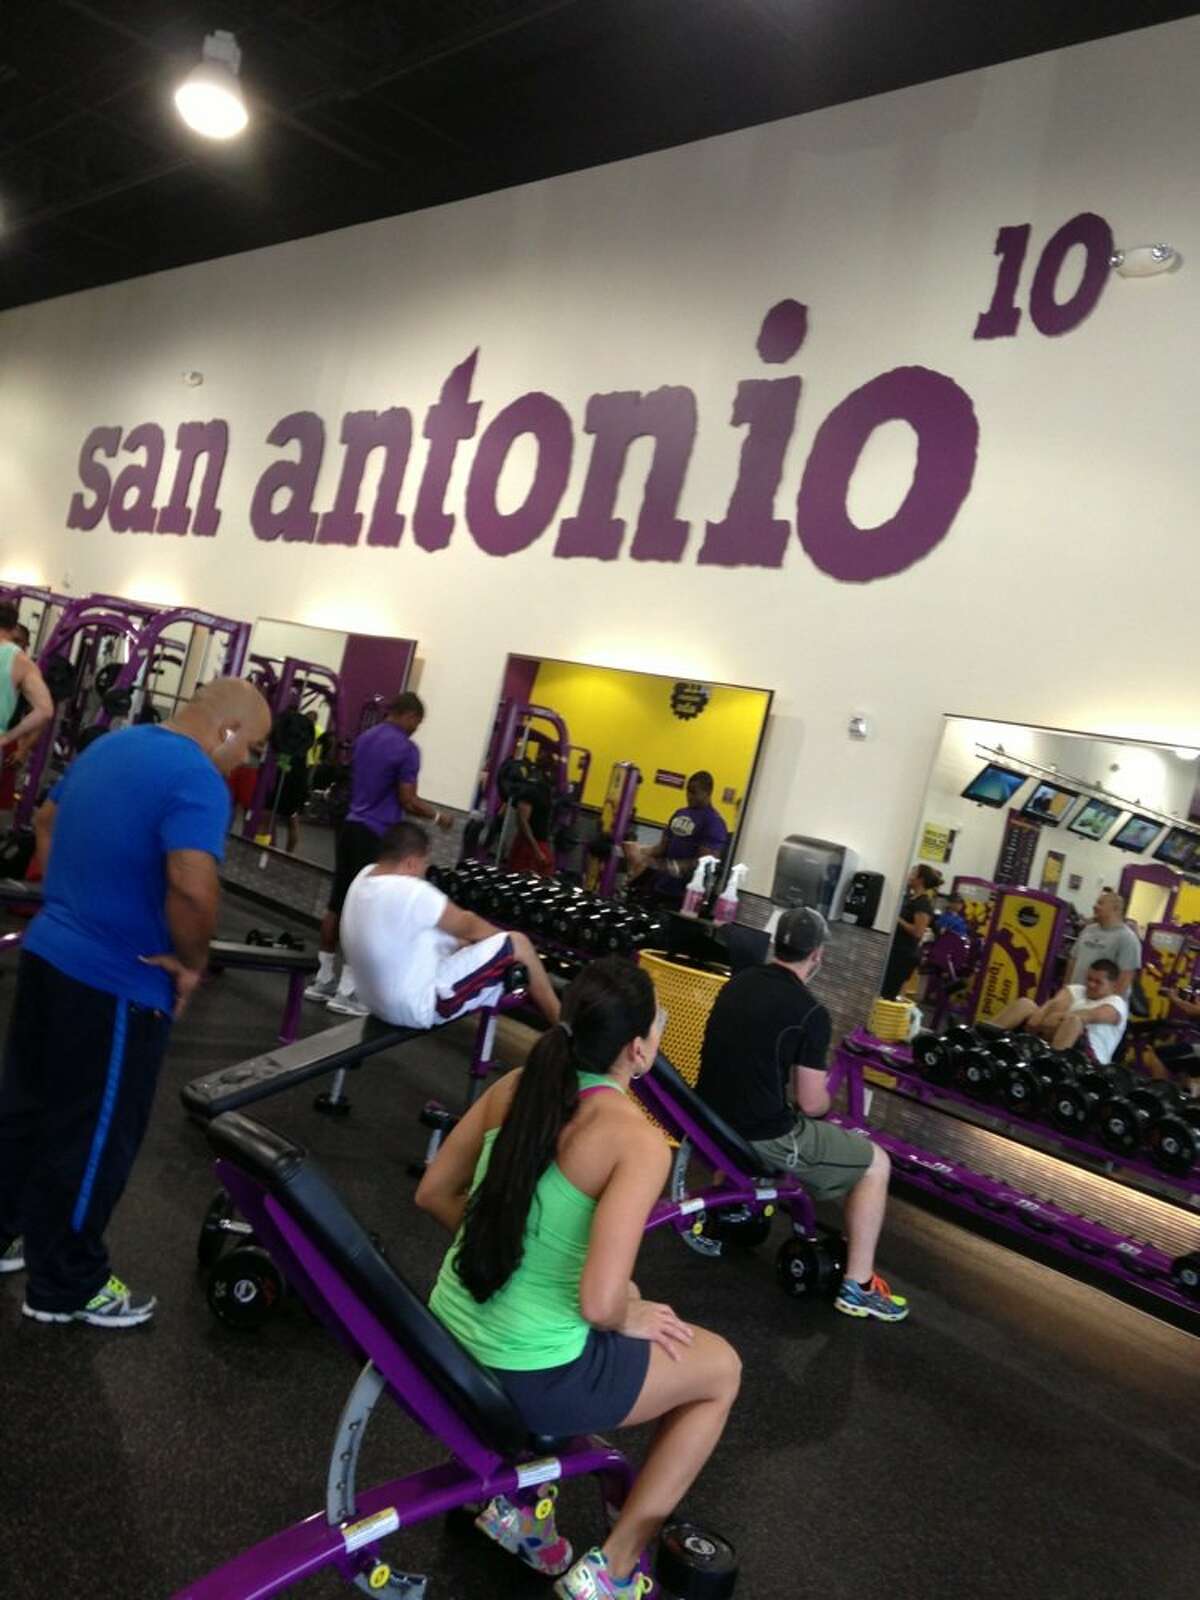 The 20 Top Rated Gyms In San Antonio According To Yelp Reviews 